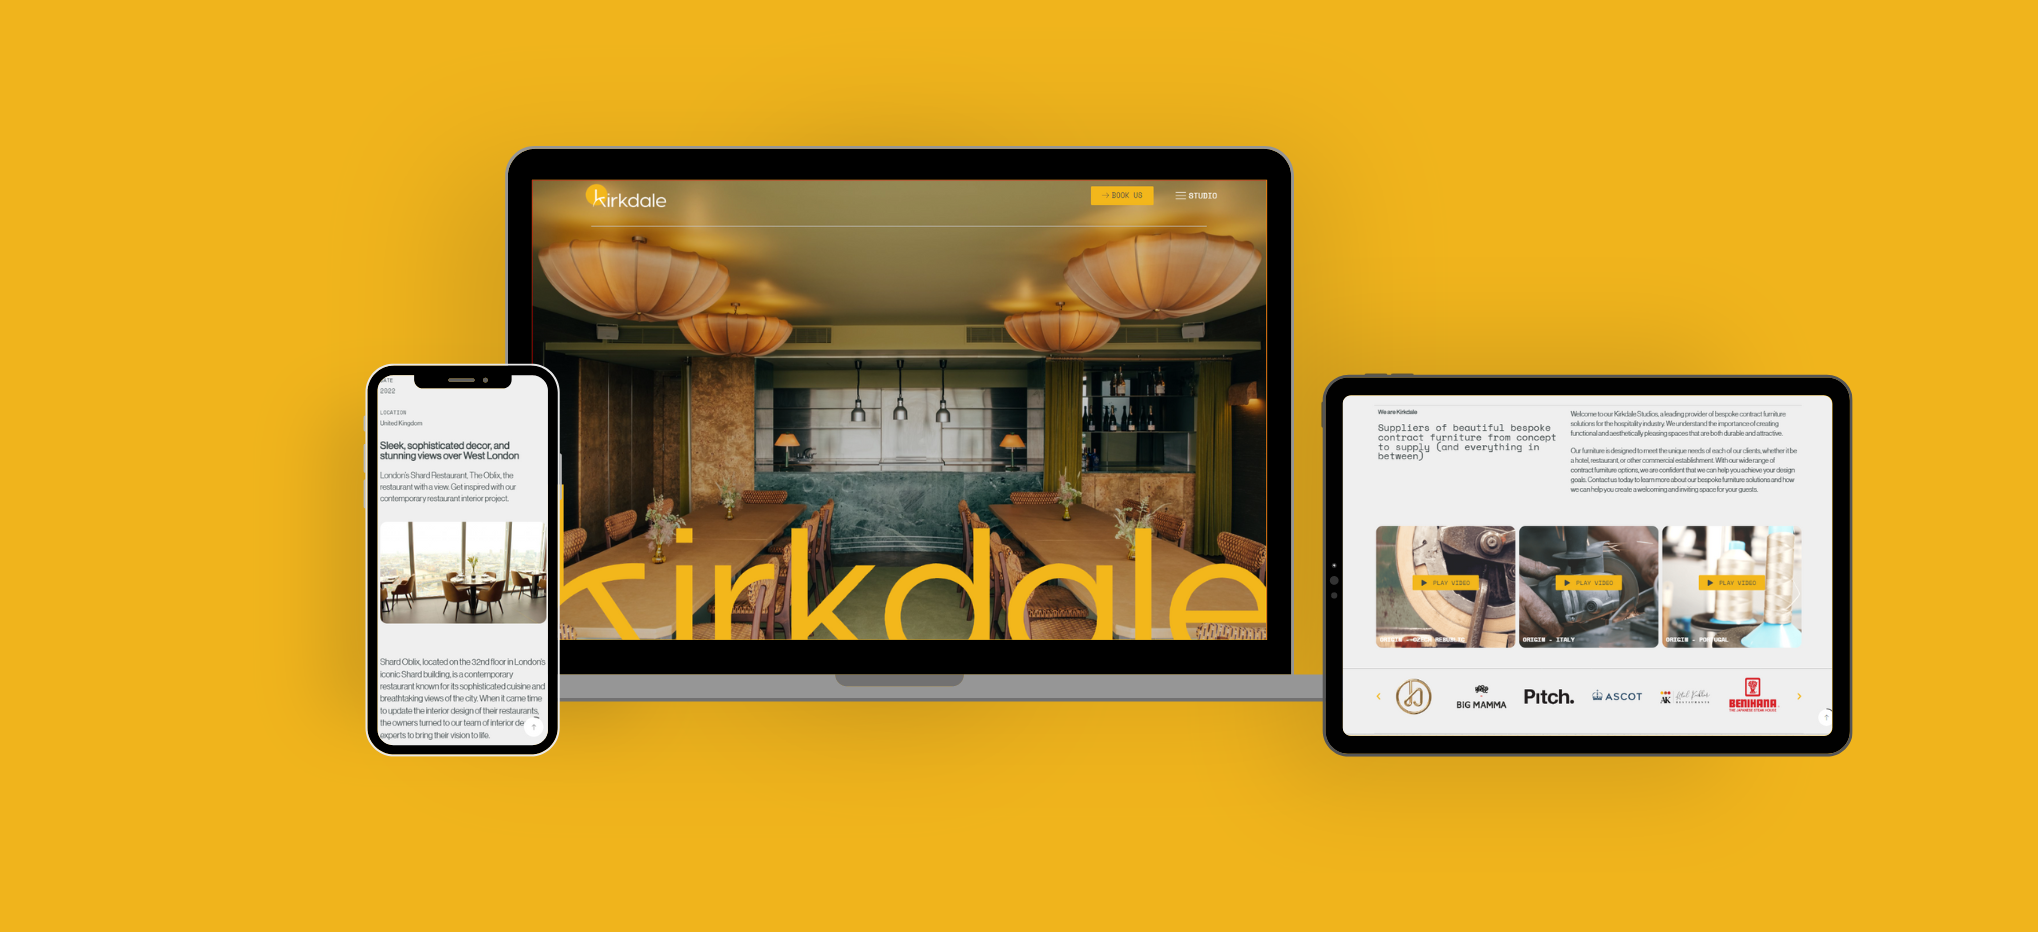 Kirkdale Studios SEO Search Engine Optimisation Case Study Featured Chell Web & Design